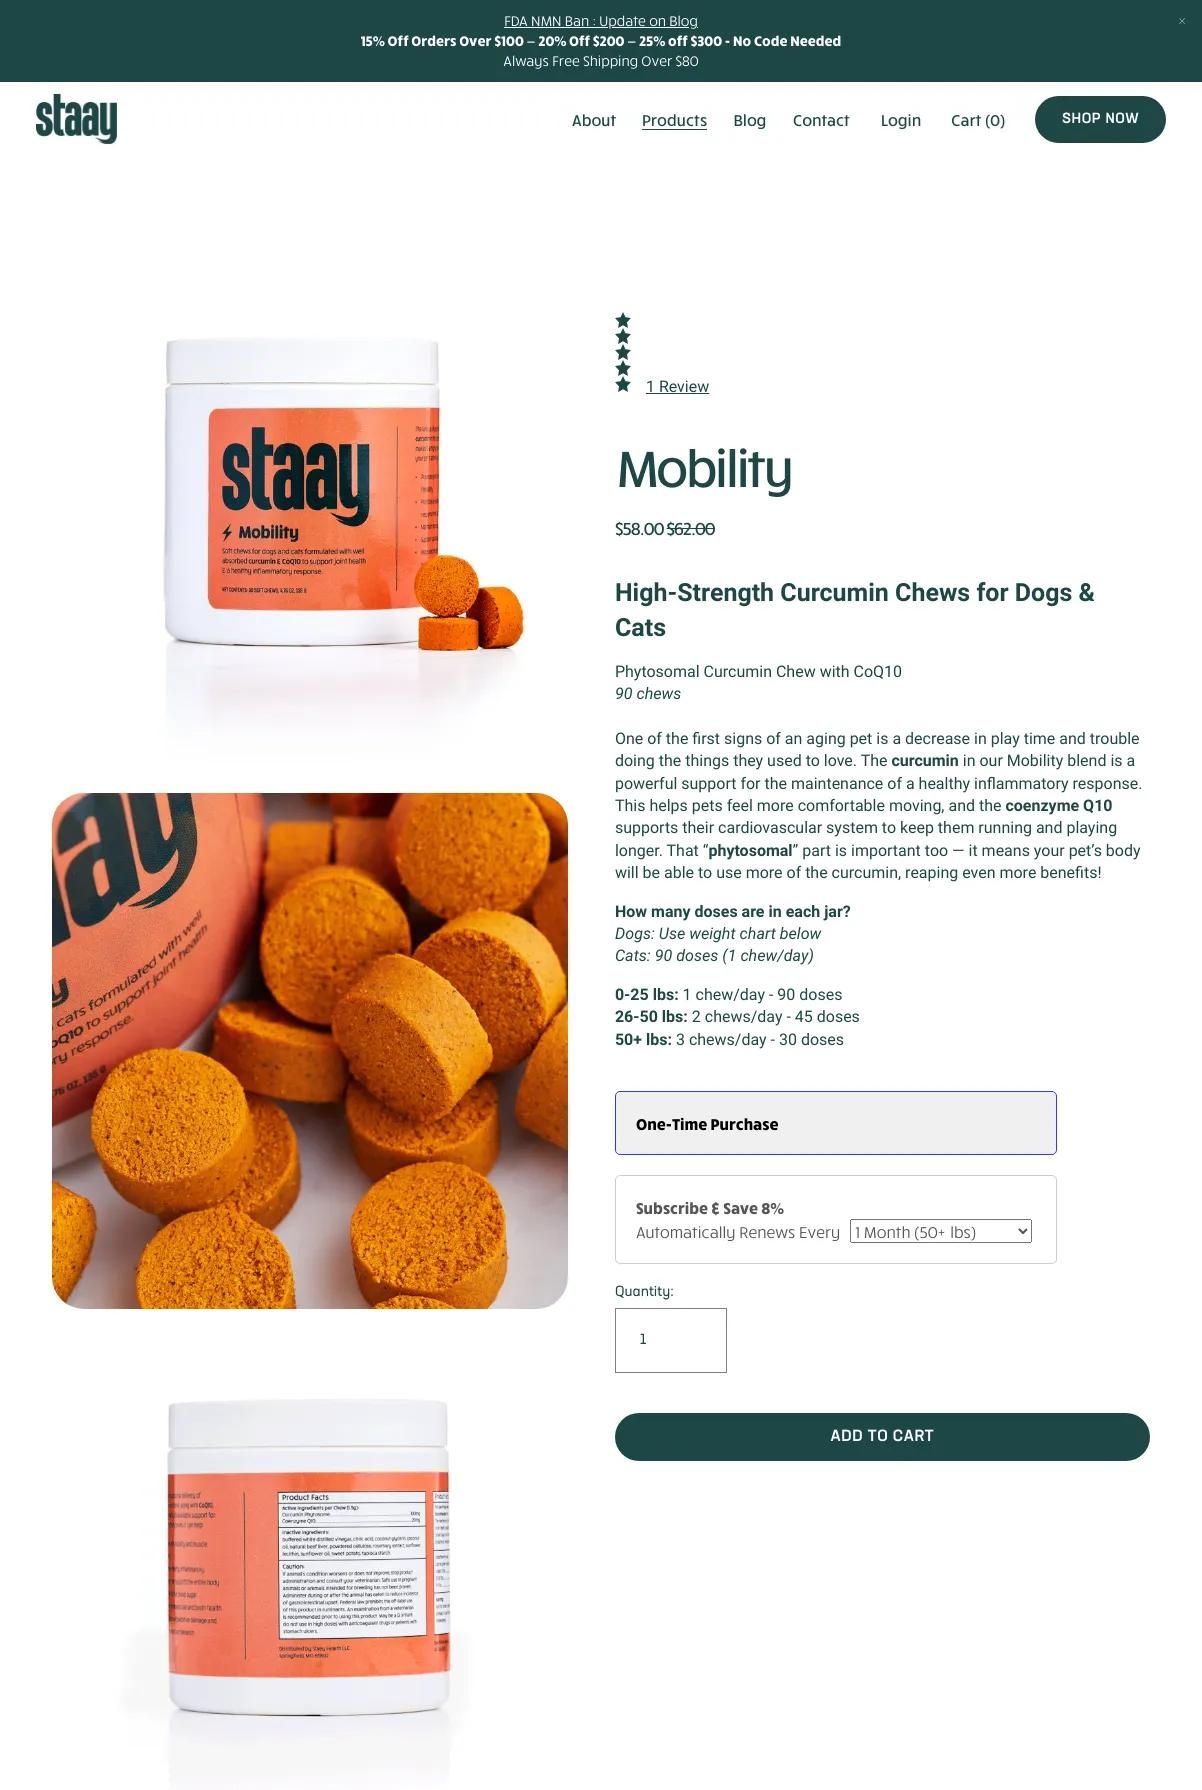 Screenshot 3 of Staay: Pet Supplements (Example Squarespace Ecommerce Website)